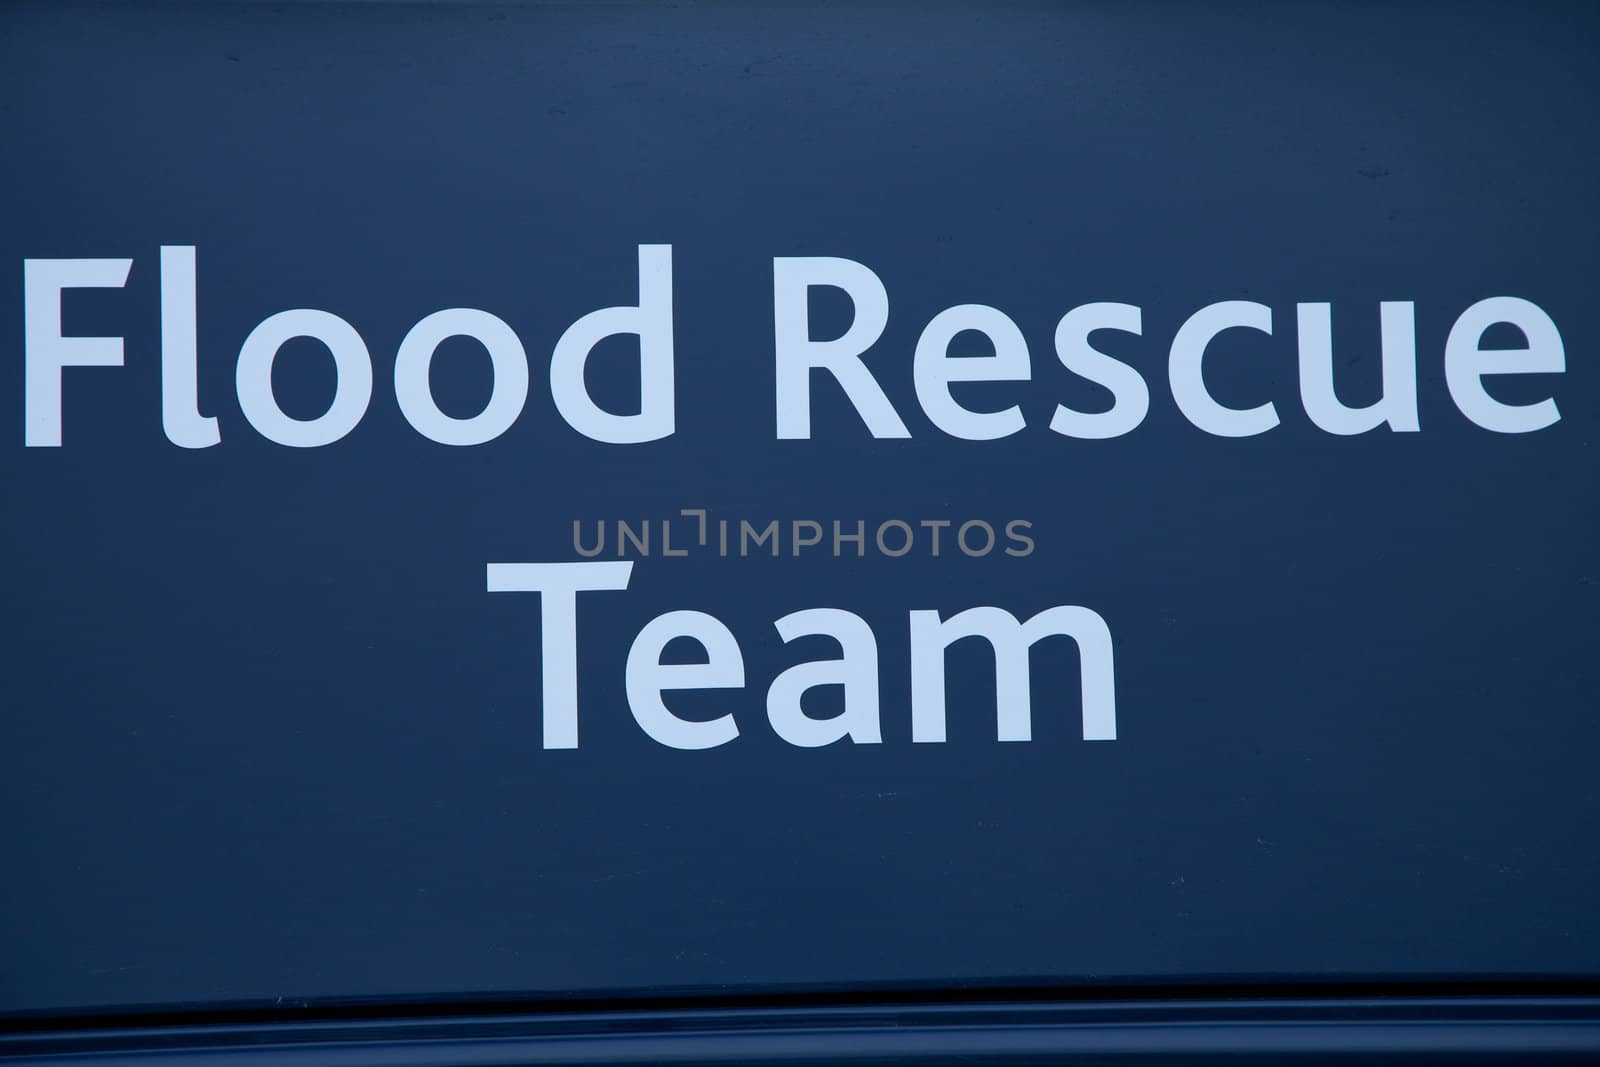 Flood rescue team sign. by richsouthwales